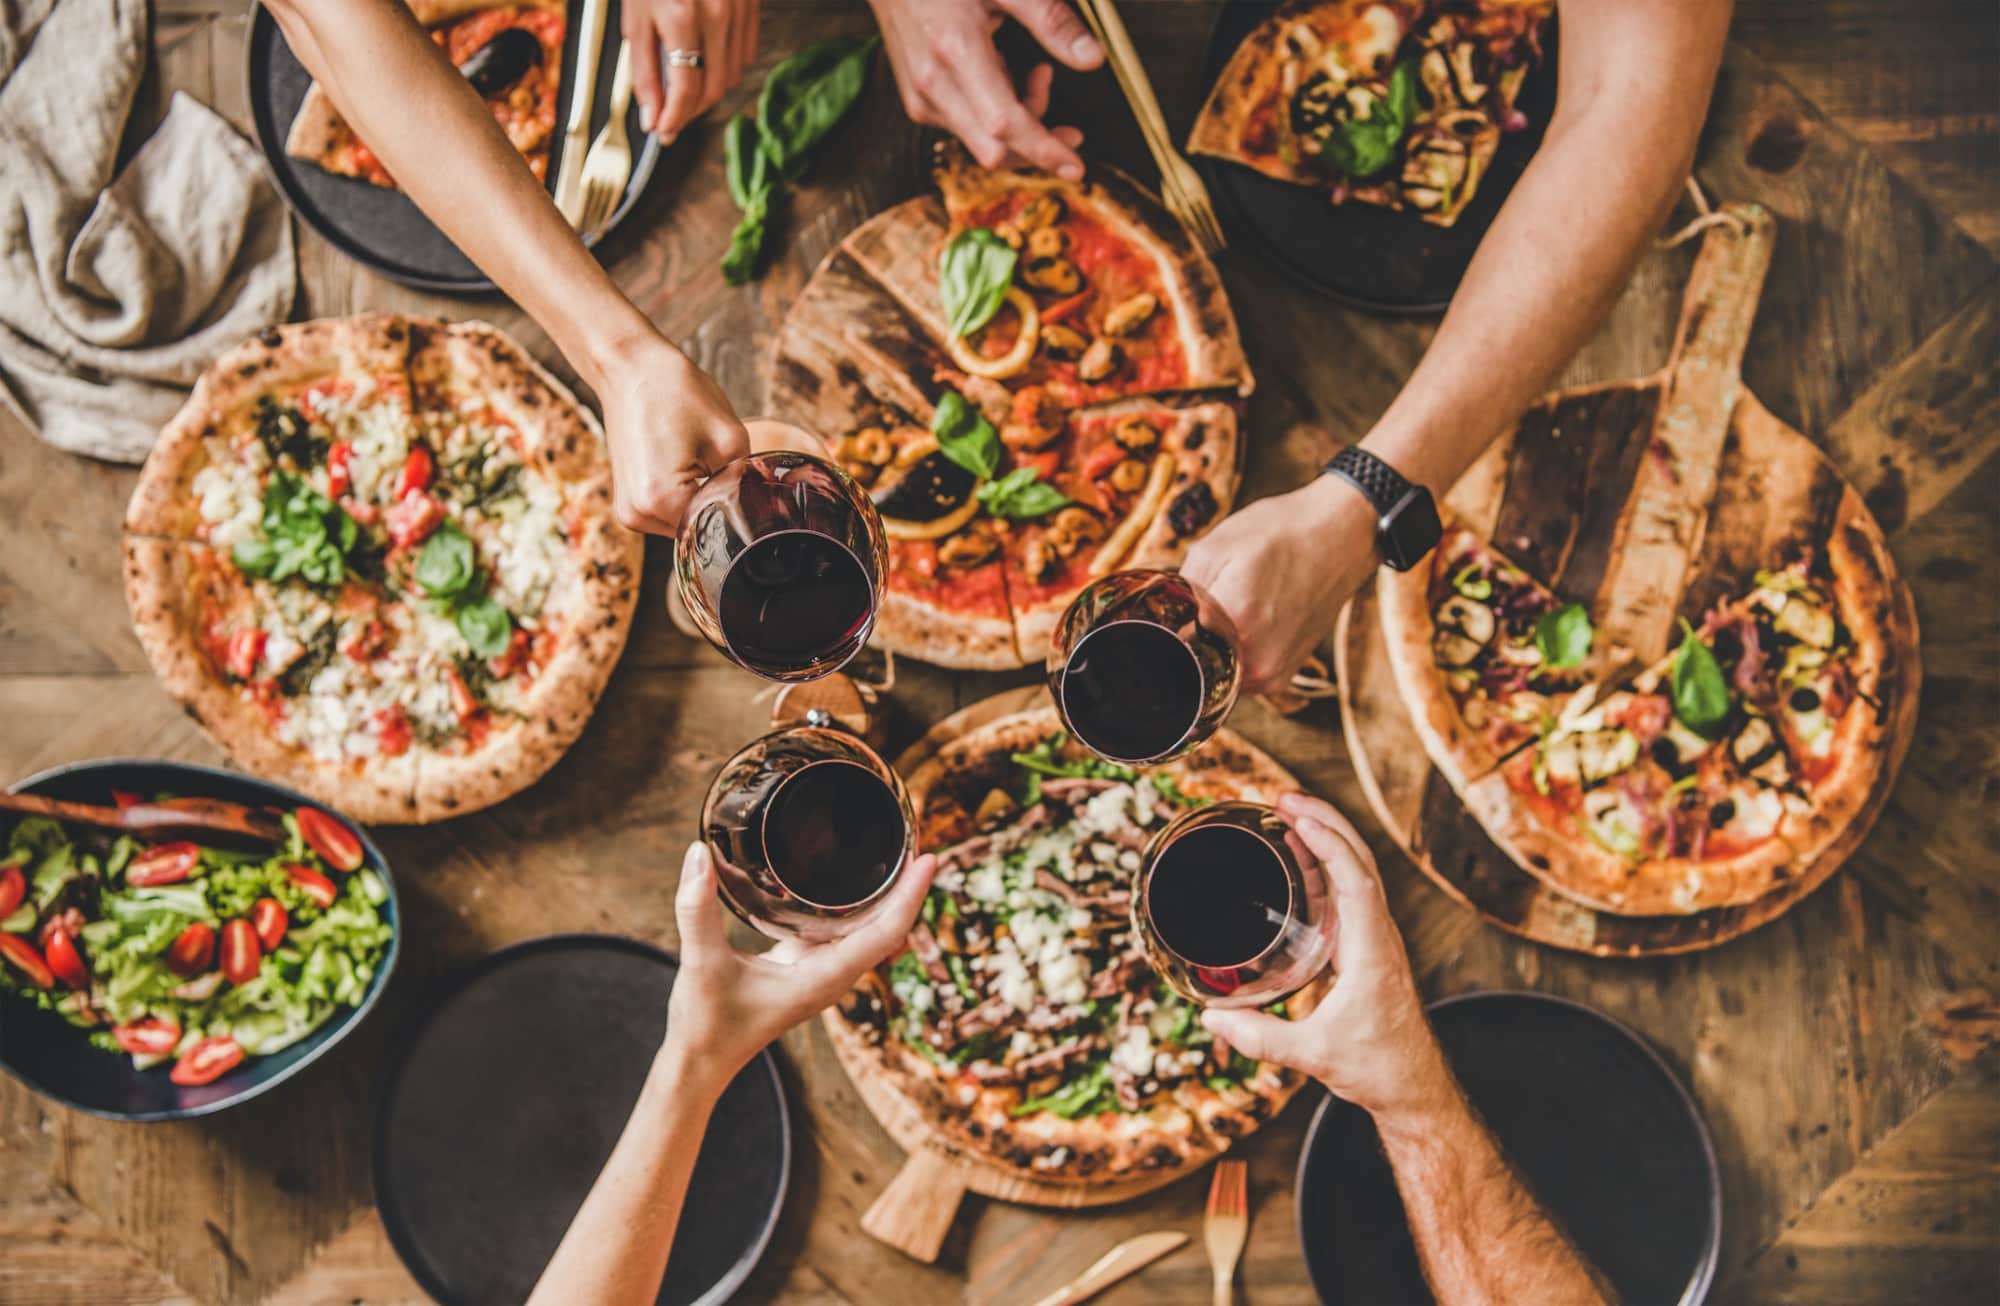 Family or friends having pizza party dinner. Flat-lay of people clinking glasses with red wine over rustic wooden table with various kinds of Italian pizza, top view. Fast food lunch, celebration (Family or friends having pizza party dinner. Flat-lay